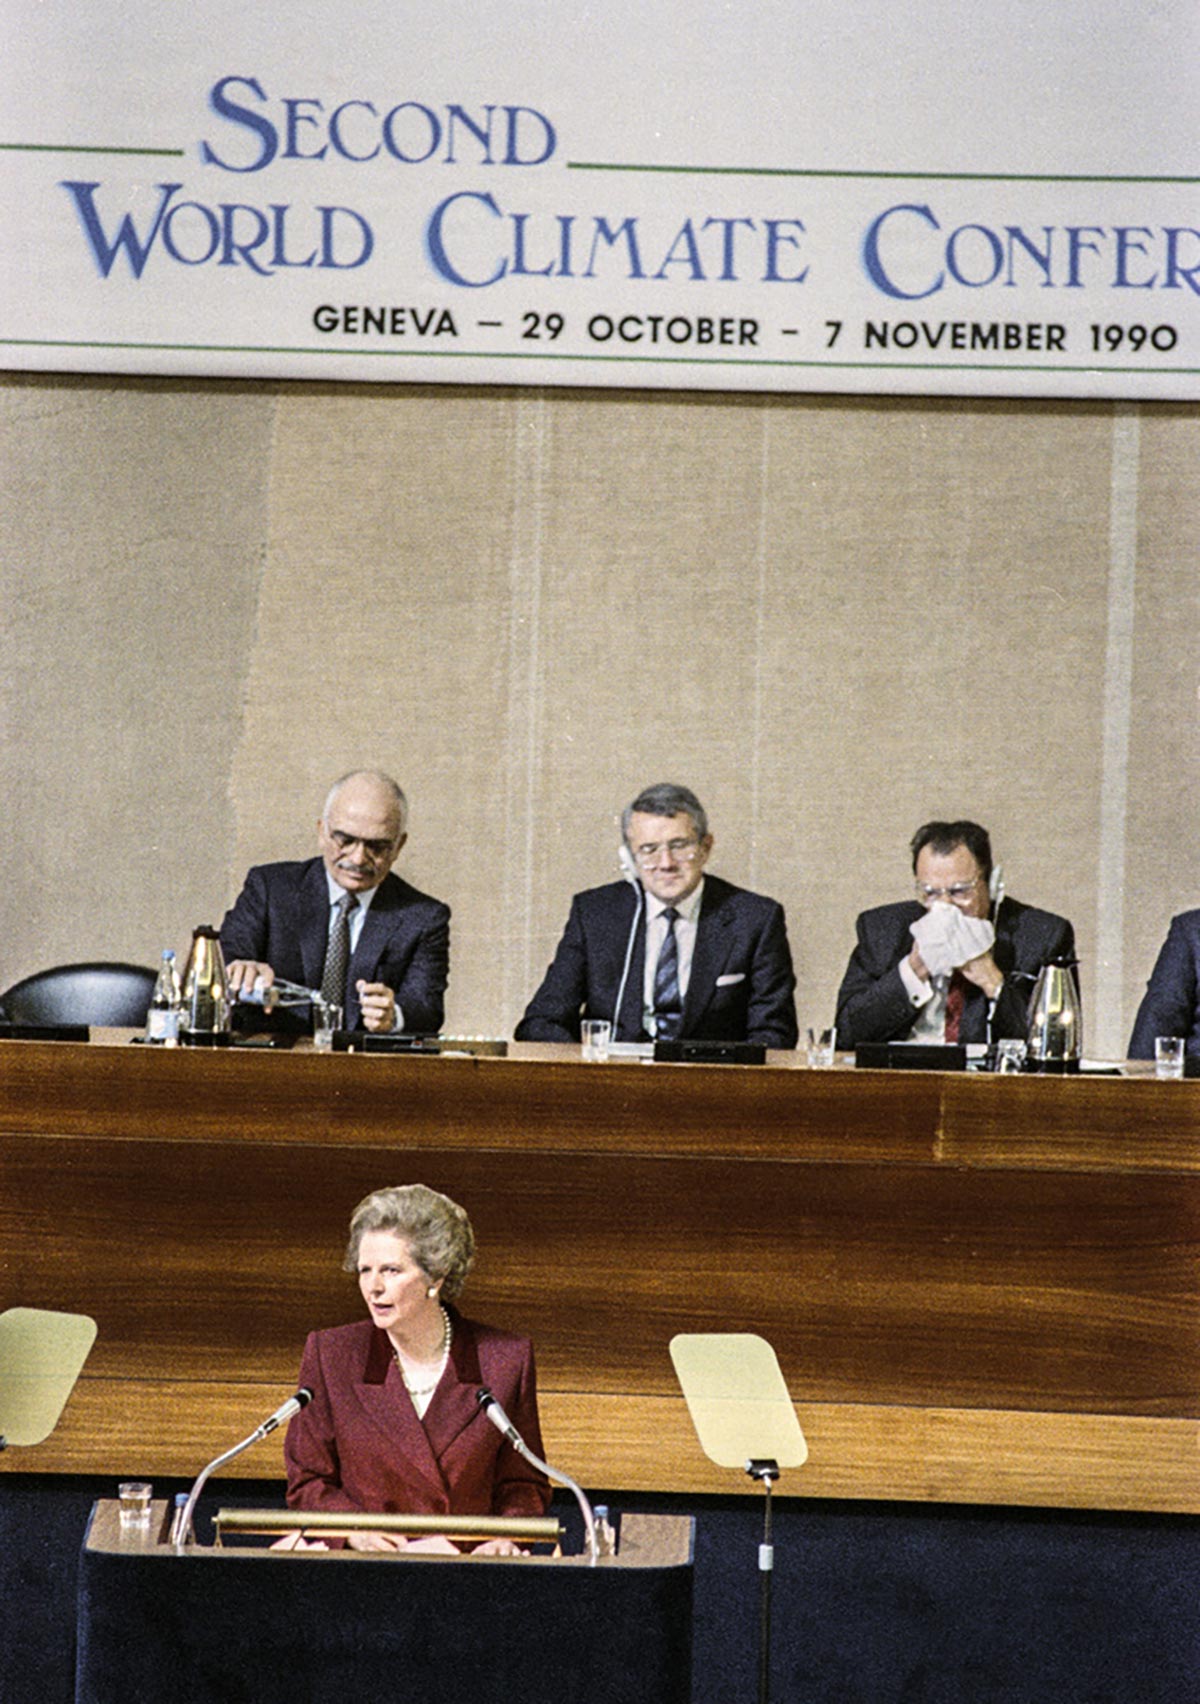 Second World Climate Conference in Geneva in 1990